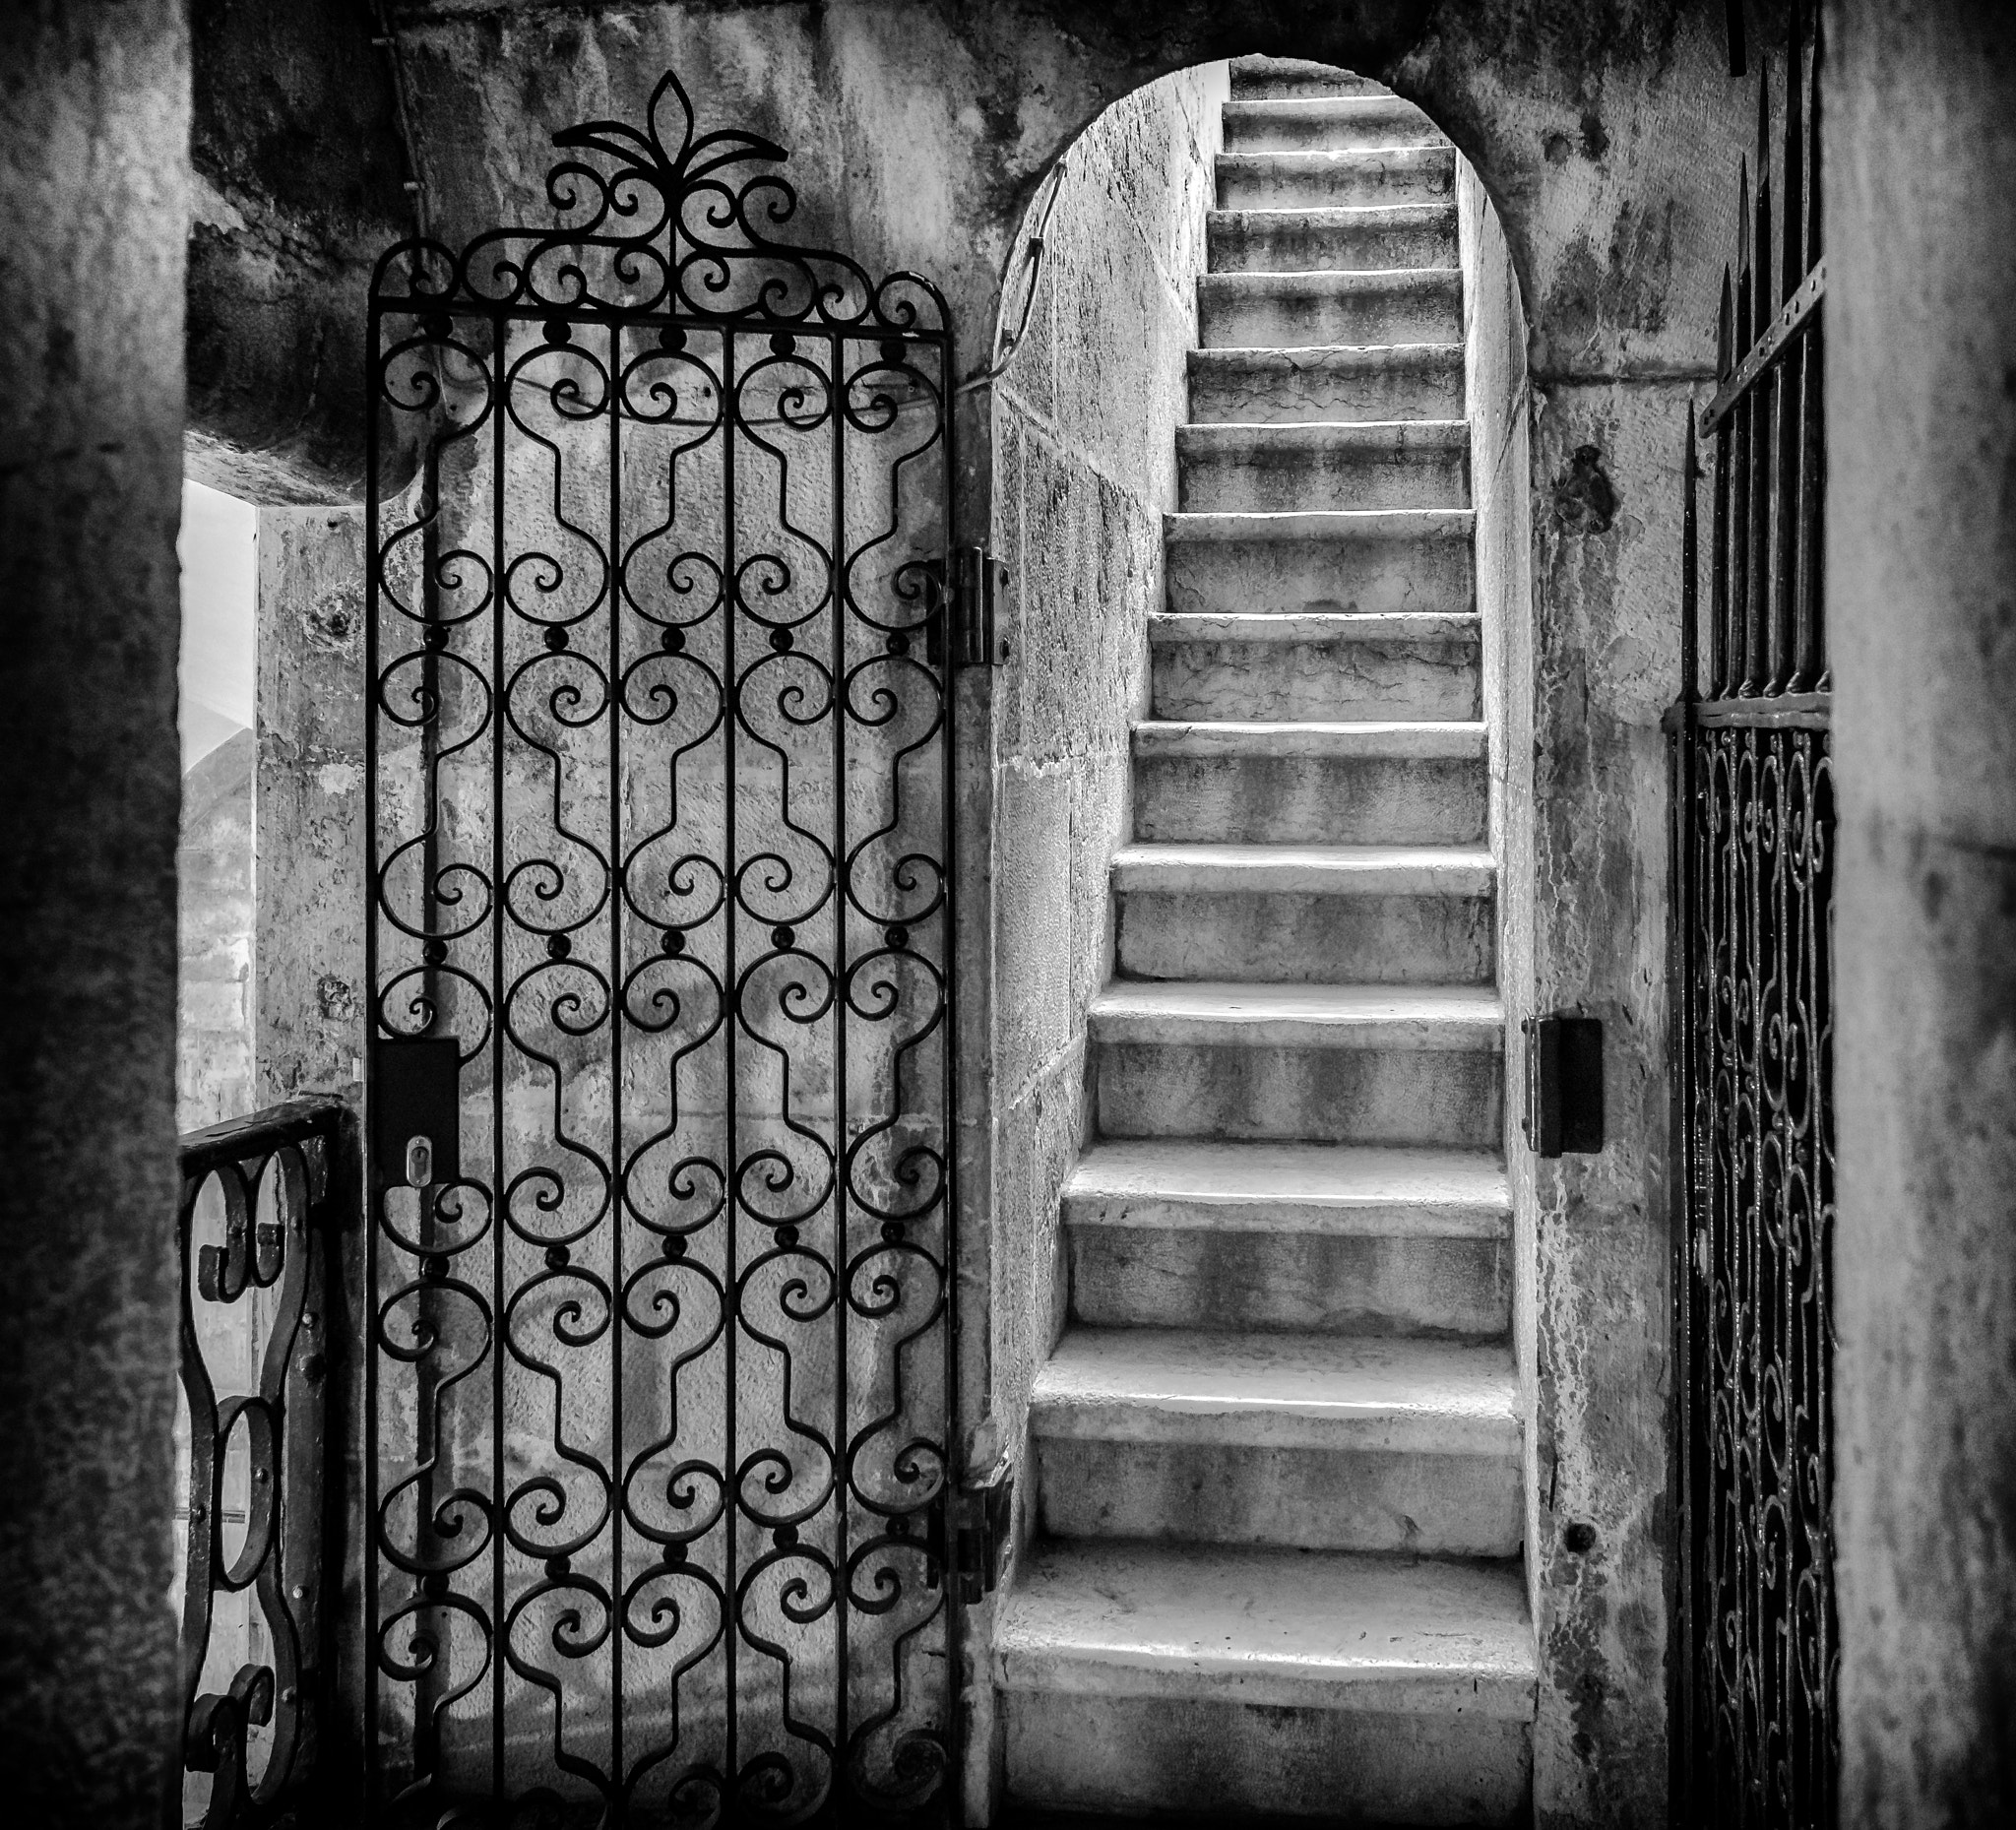 Olympus PEN E-P5 sample photo. The staircase photography